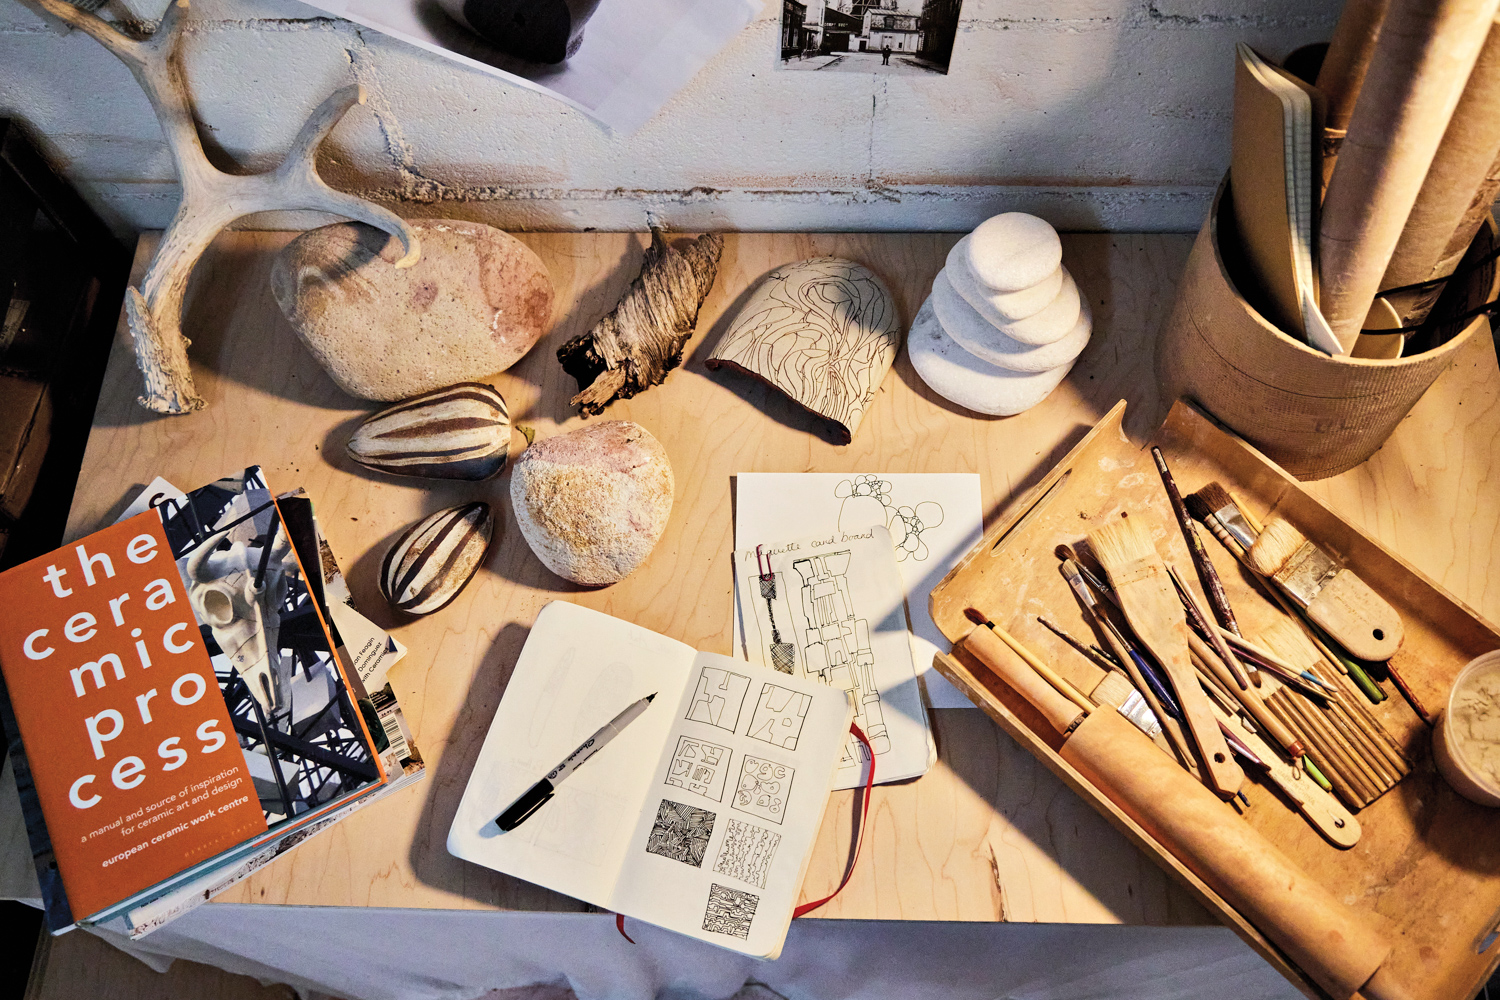 Table with objects, notebooks, inspiration clippings and tools